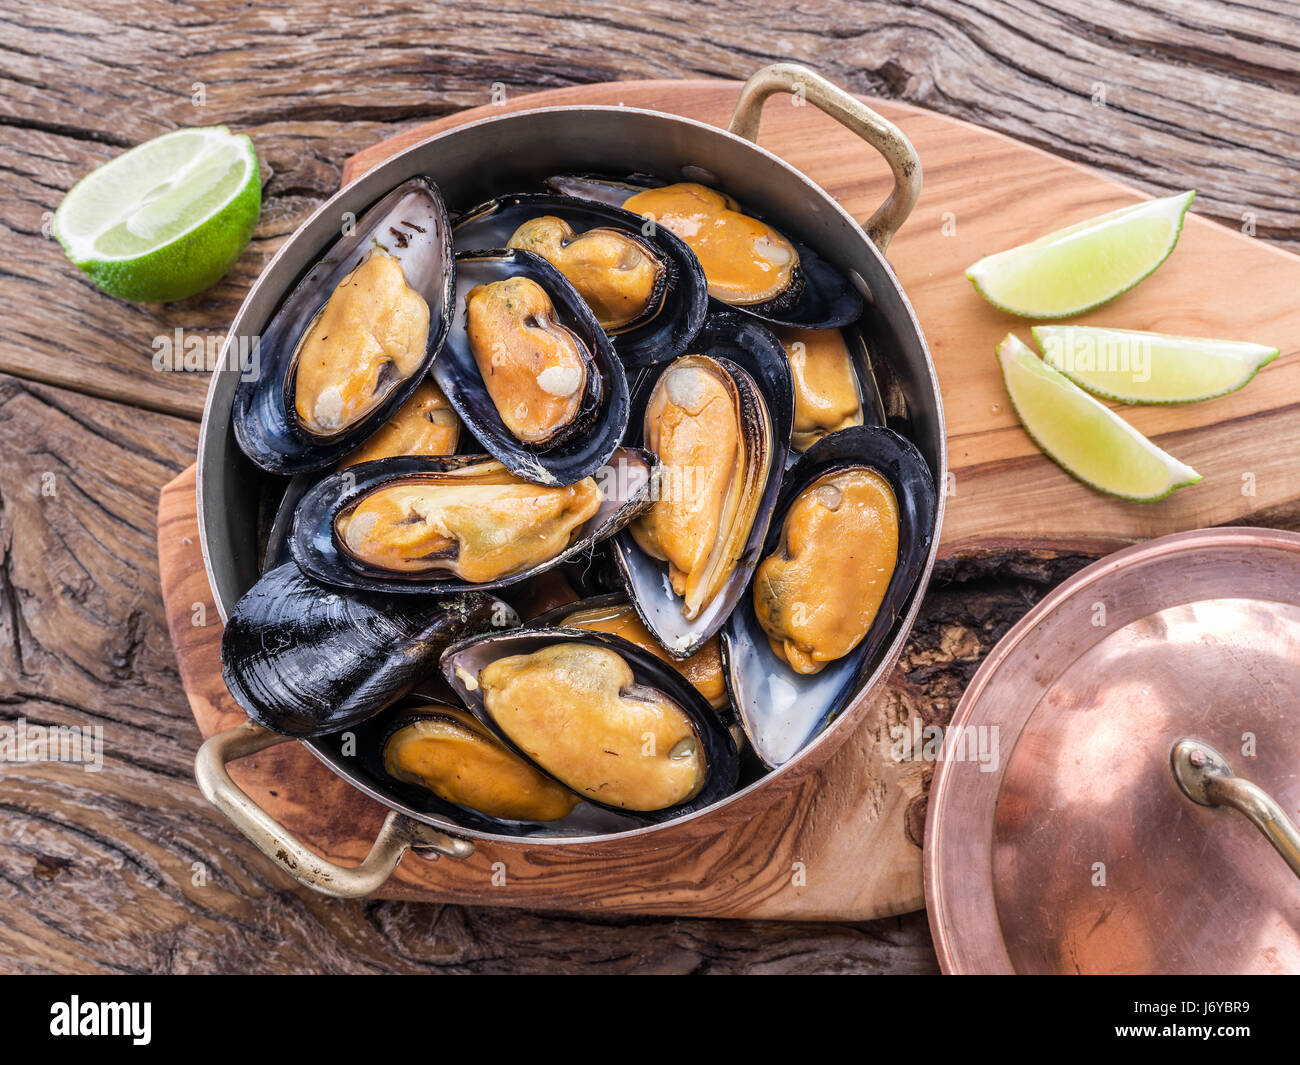 Boiled mussels in copper pan on the wooden table. Stock Photo